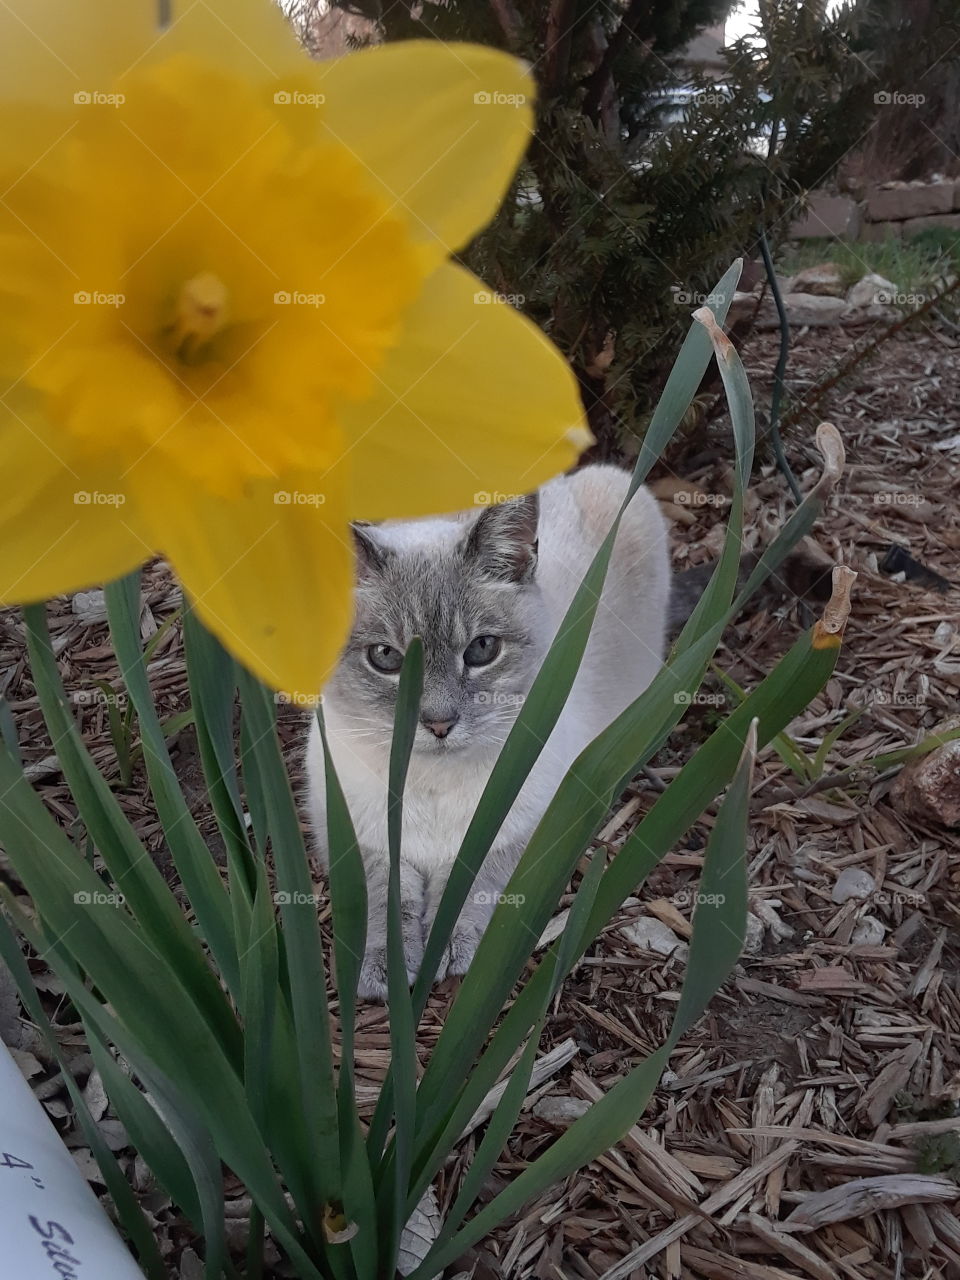 Siamese Tabby Cat in the garden with yellow daffodil